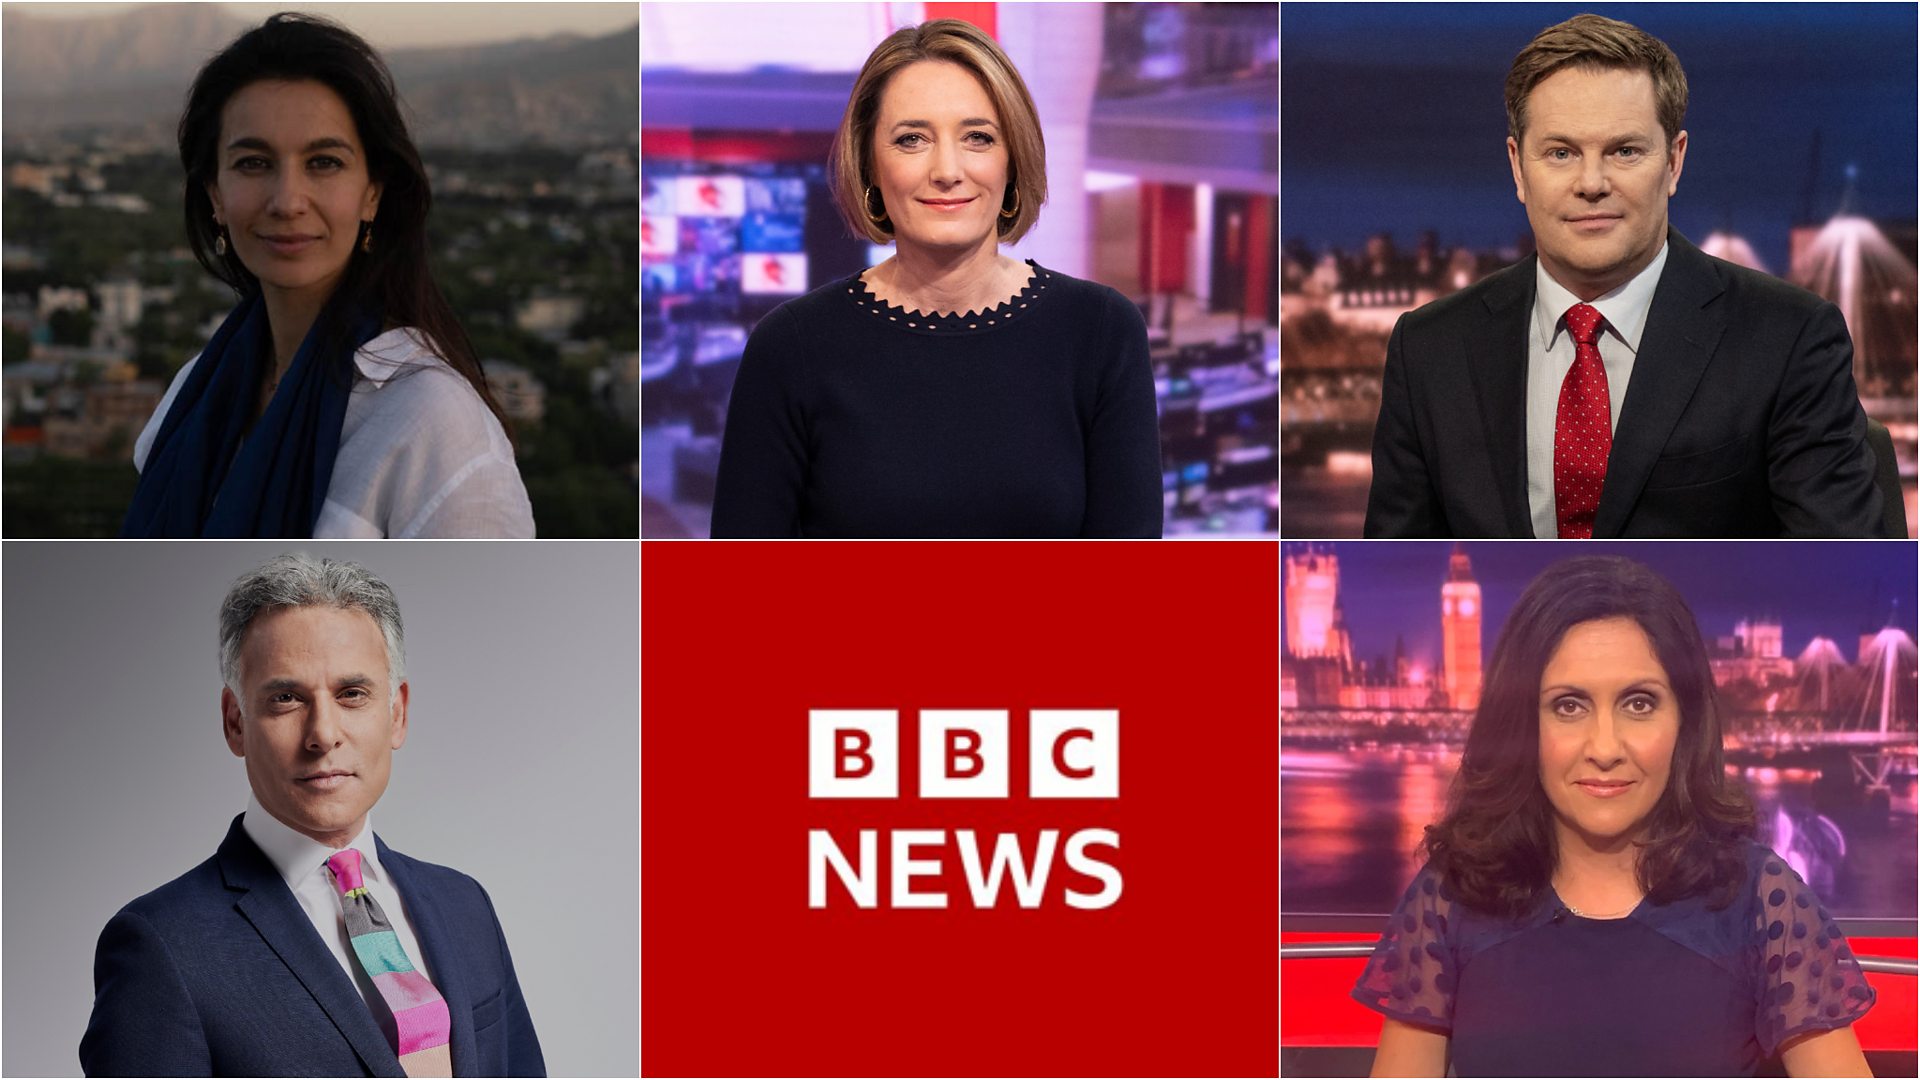 BBC unveils presenter line-up for news channel